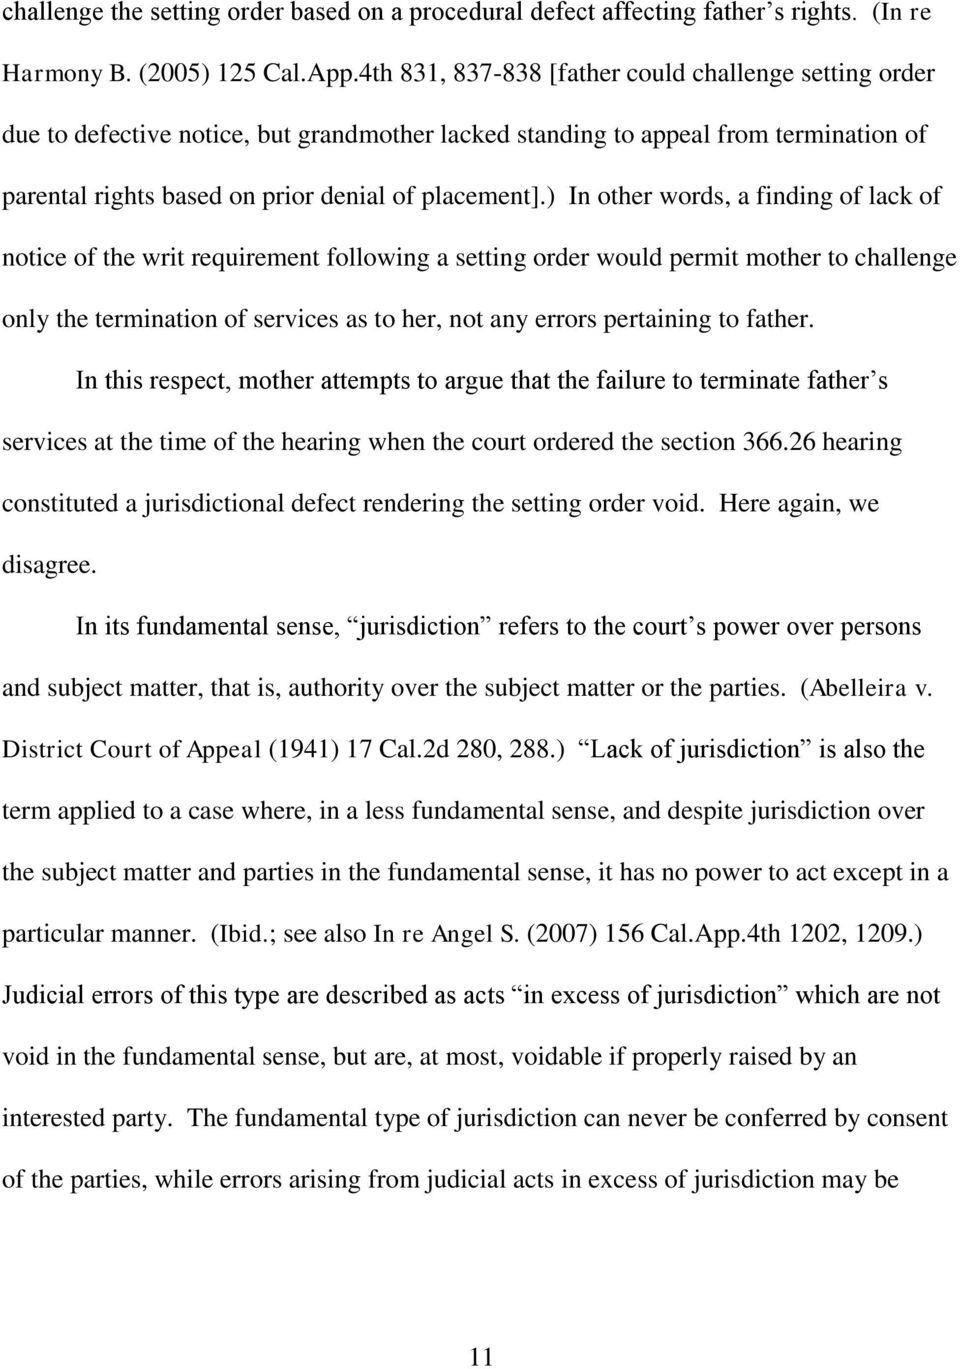 ) In other words, a finding of lack of notice of the writ requirement following a setting order would permit mother to challenge only the termination of services as to her, not any errors pertaining